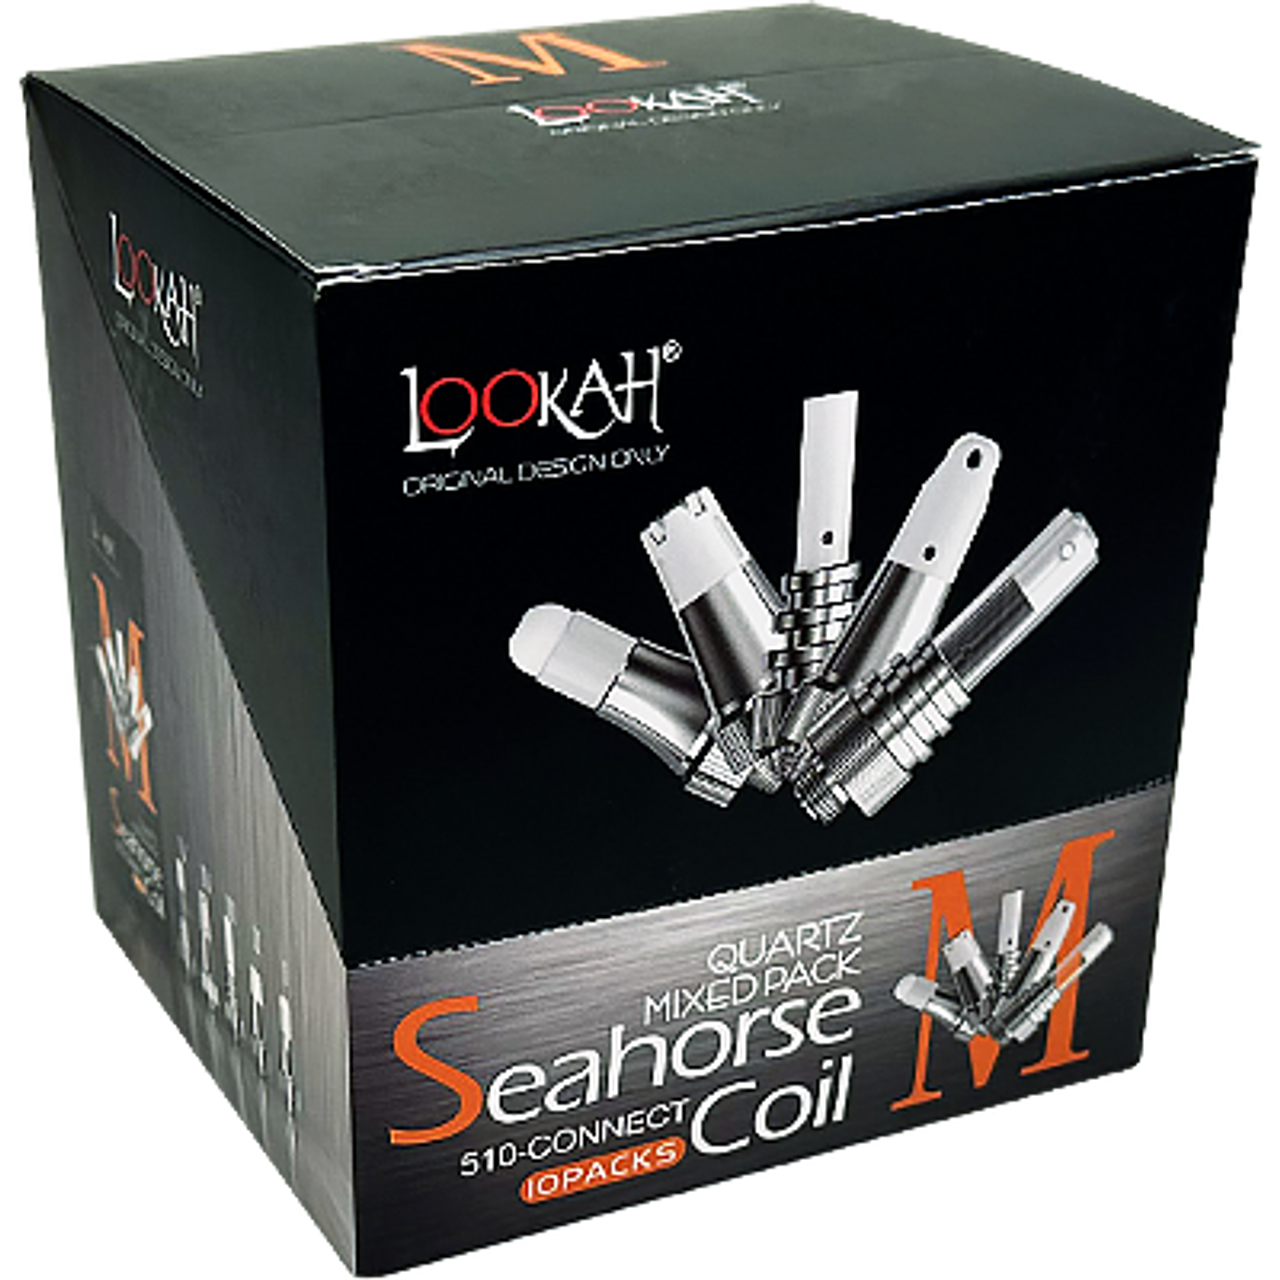 Lookah Seahorse Coil Variety Pack - 4 Different Coils